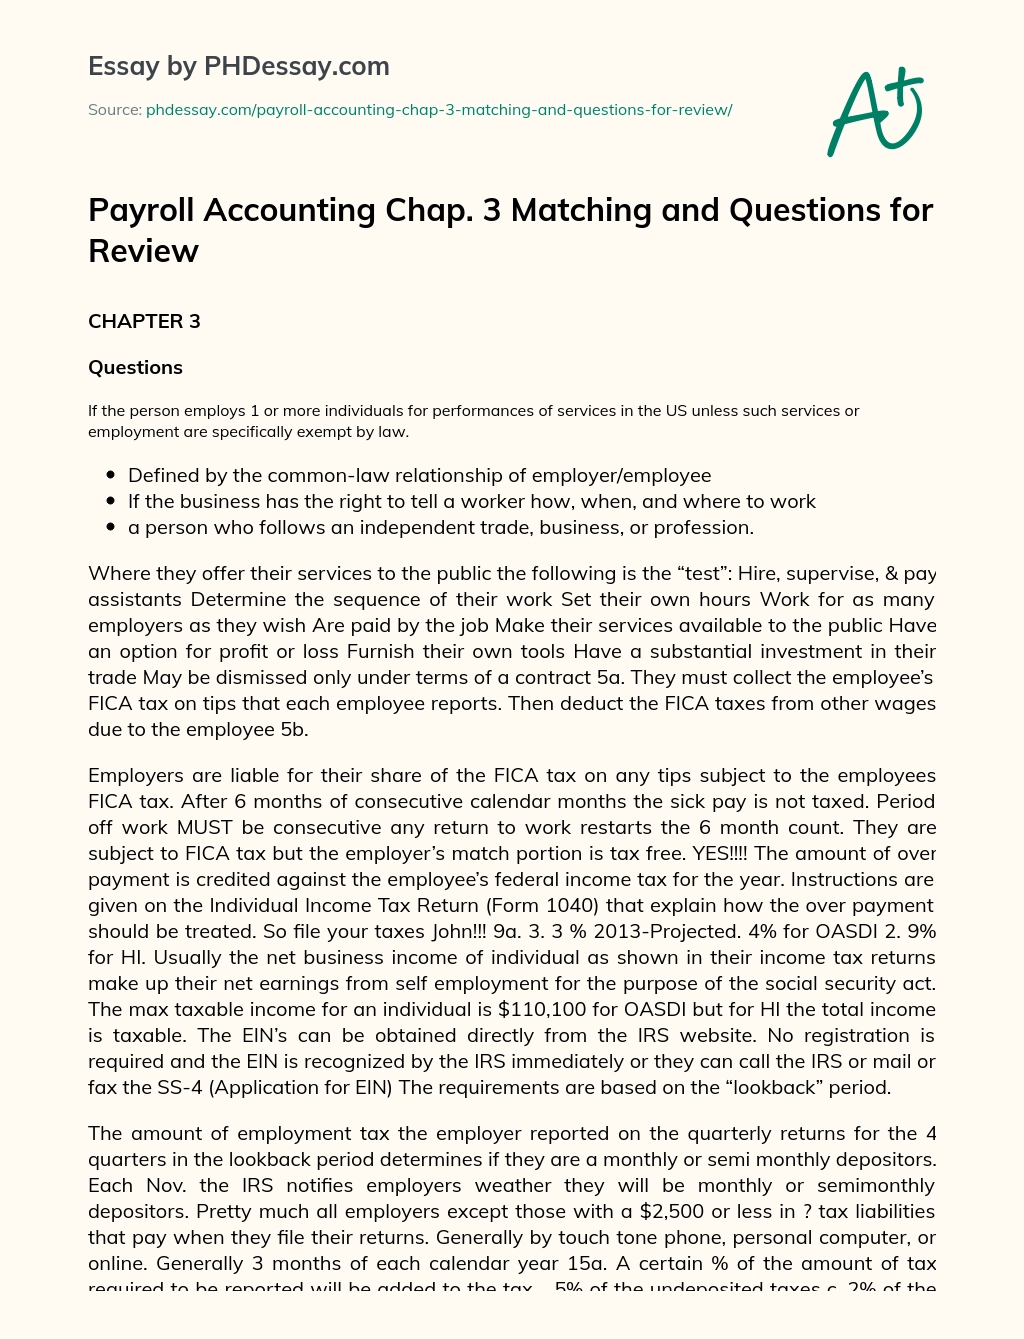 Payroll Accounting Chap. 3 Matching and Questions for Review essay